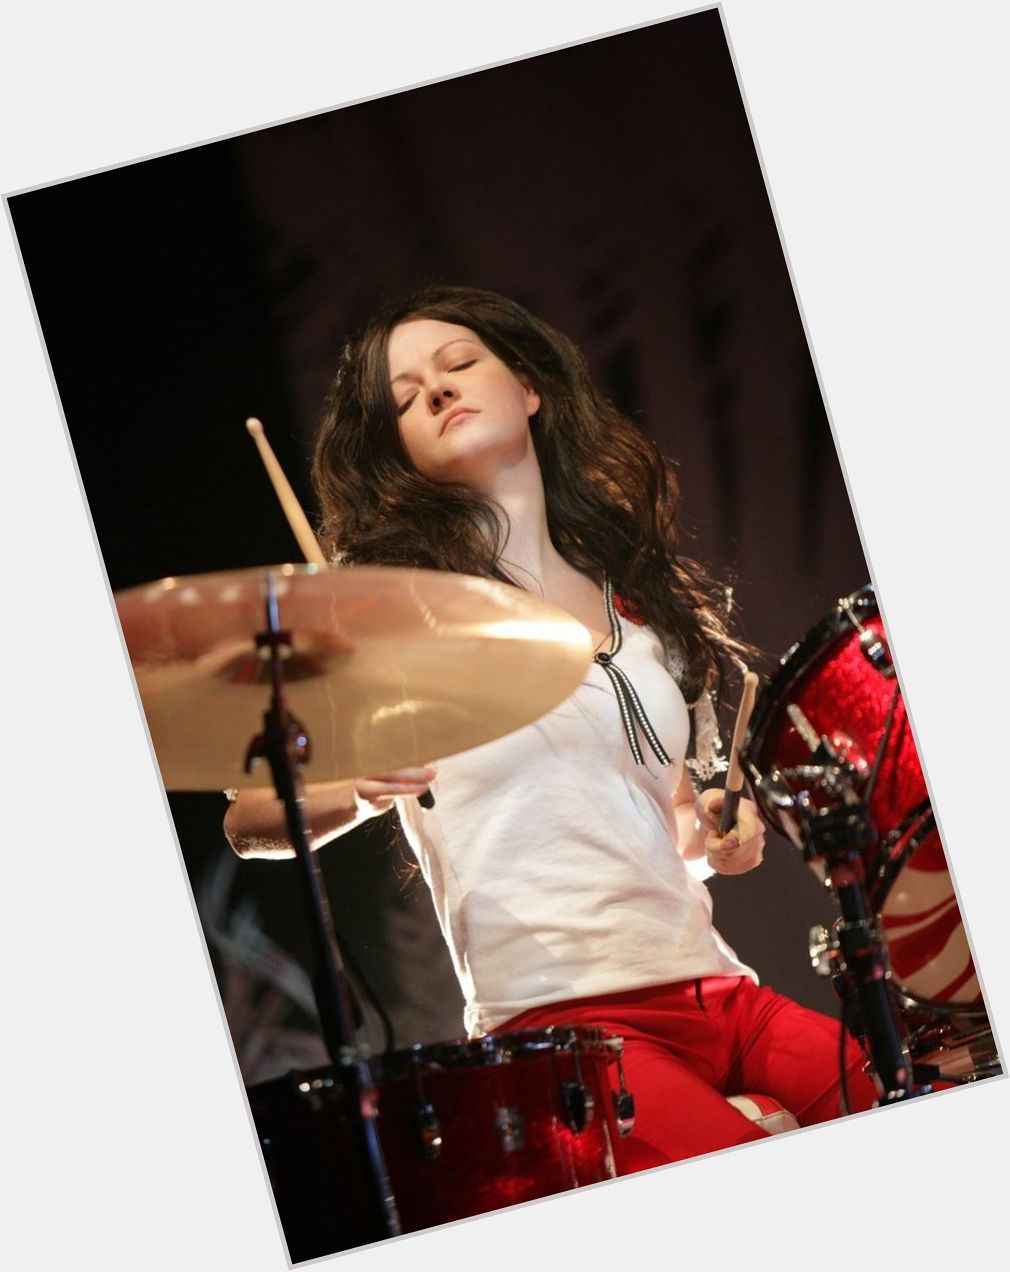 Happy Birthday To The One And Only Meg White! 